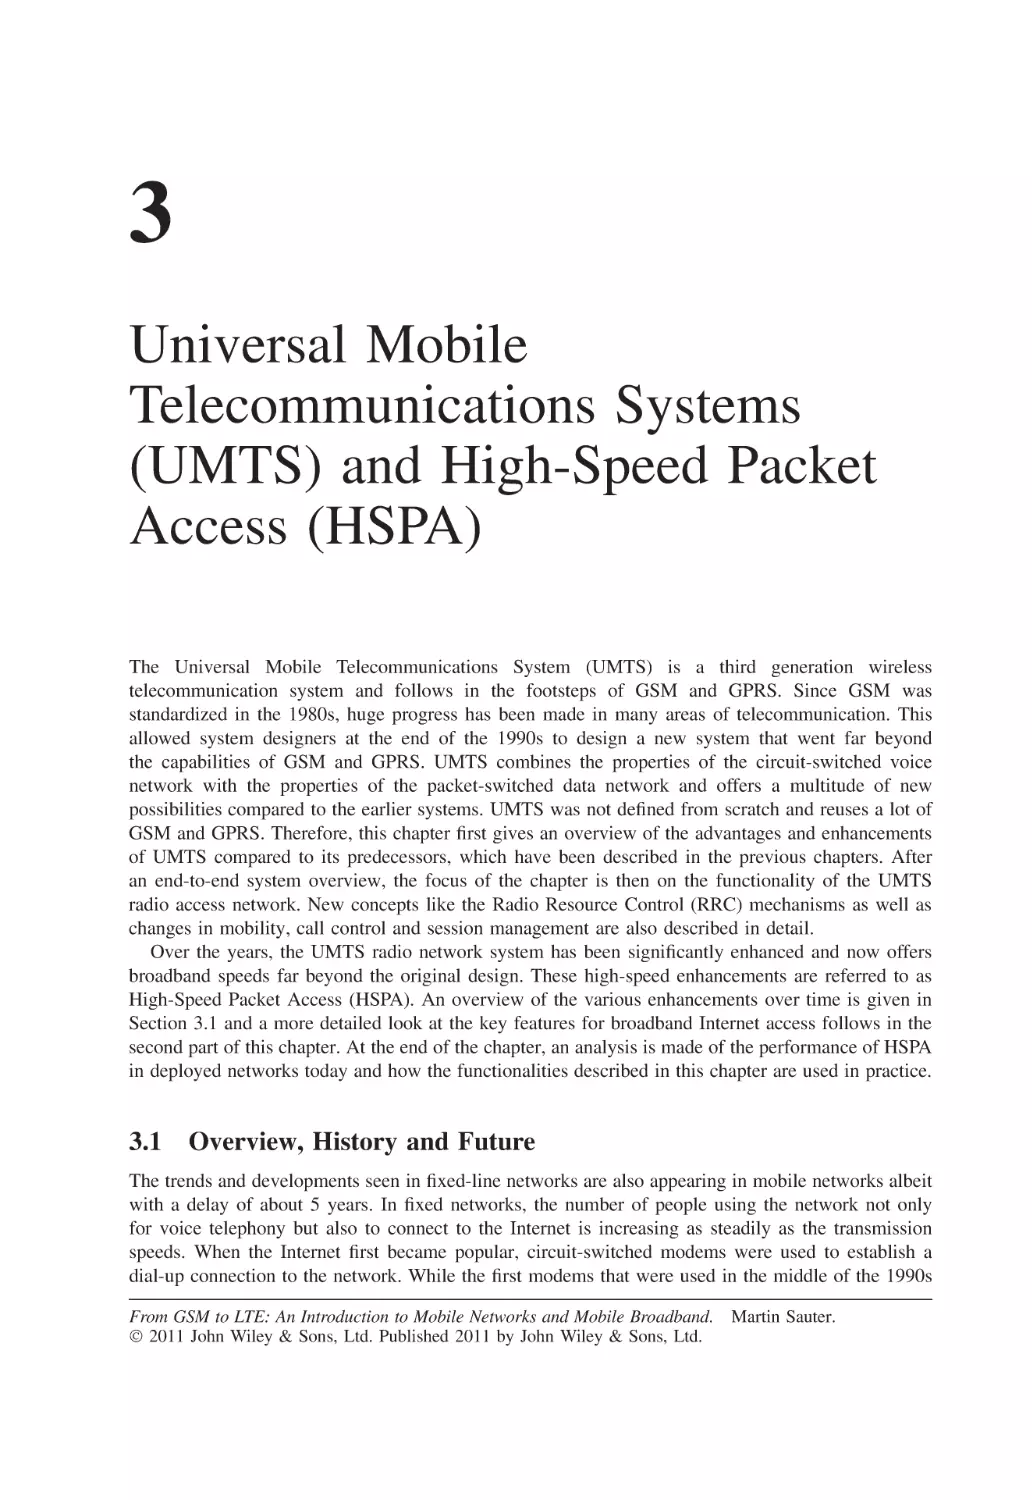 3 Universal Mobile Telecommunications Systems (UMTS) and High-Speed Packet Access (HSPA)
3.1 Overview, History and Future